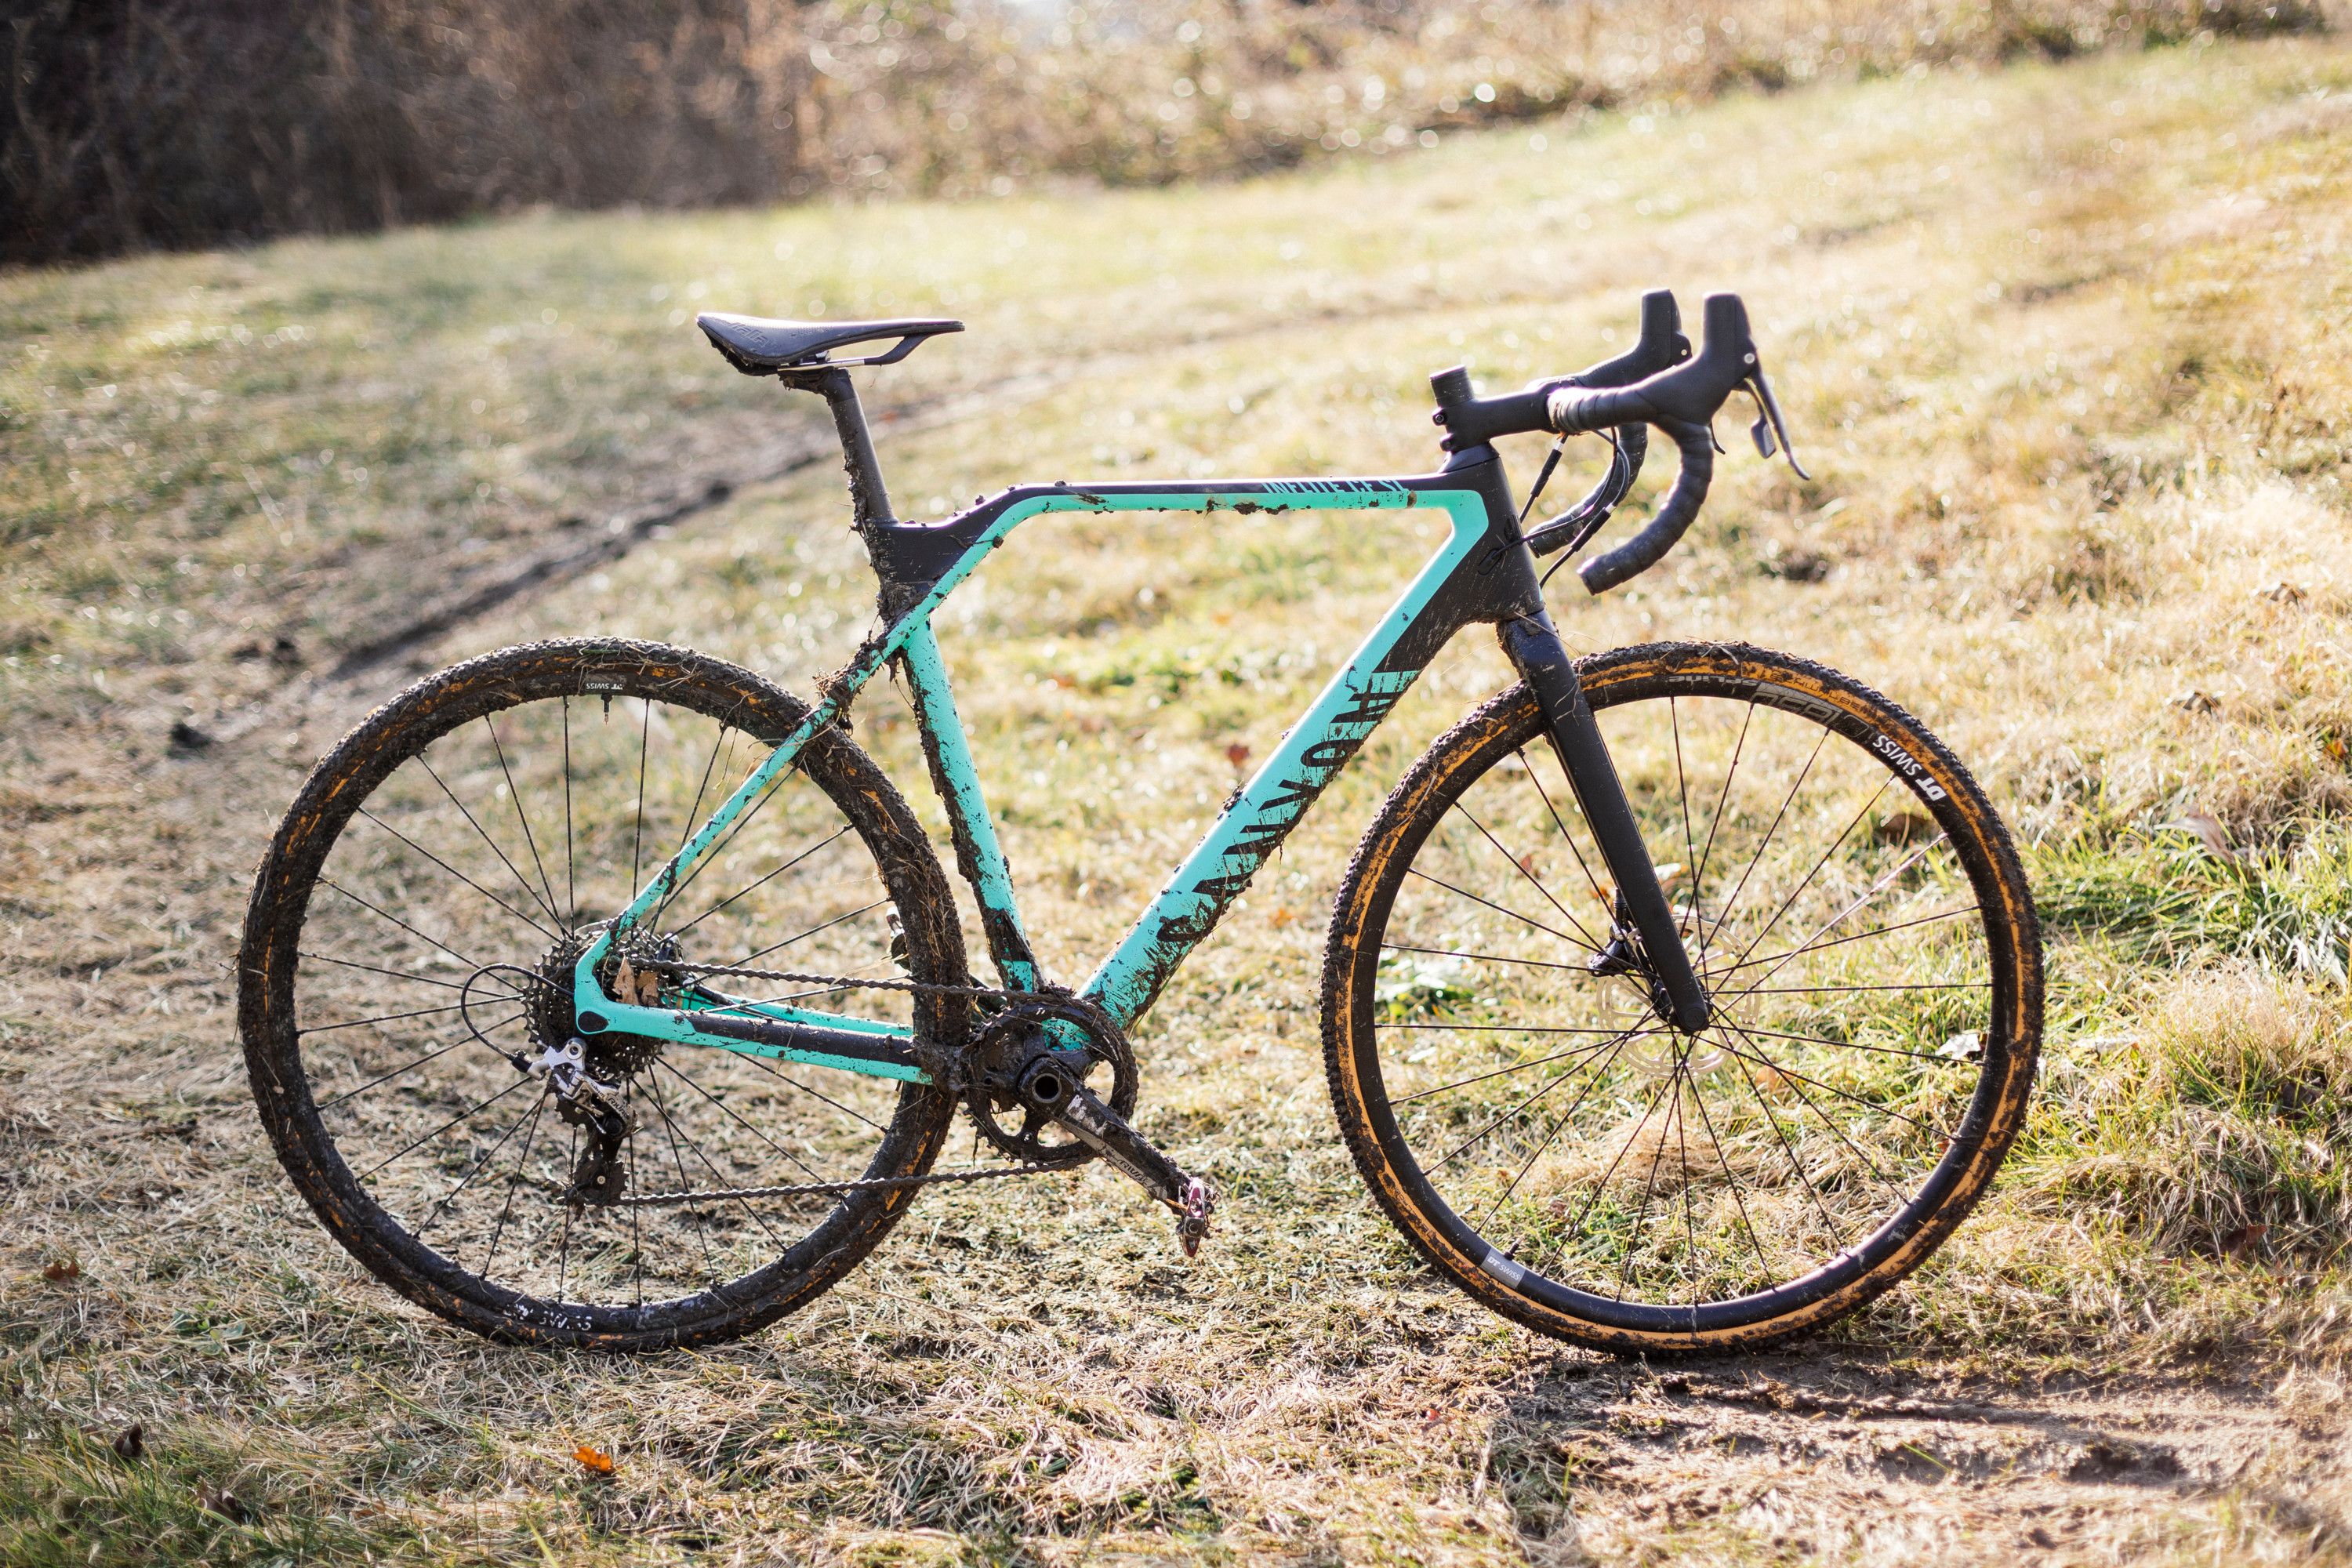 Canyon Inflite CF SL 7.0 Review | Best Cyclocross Bikes 2021